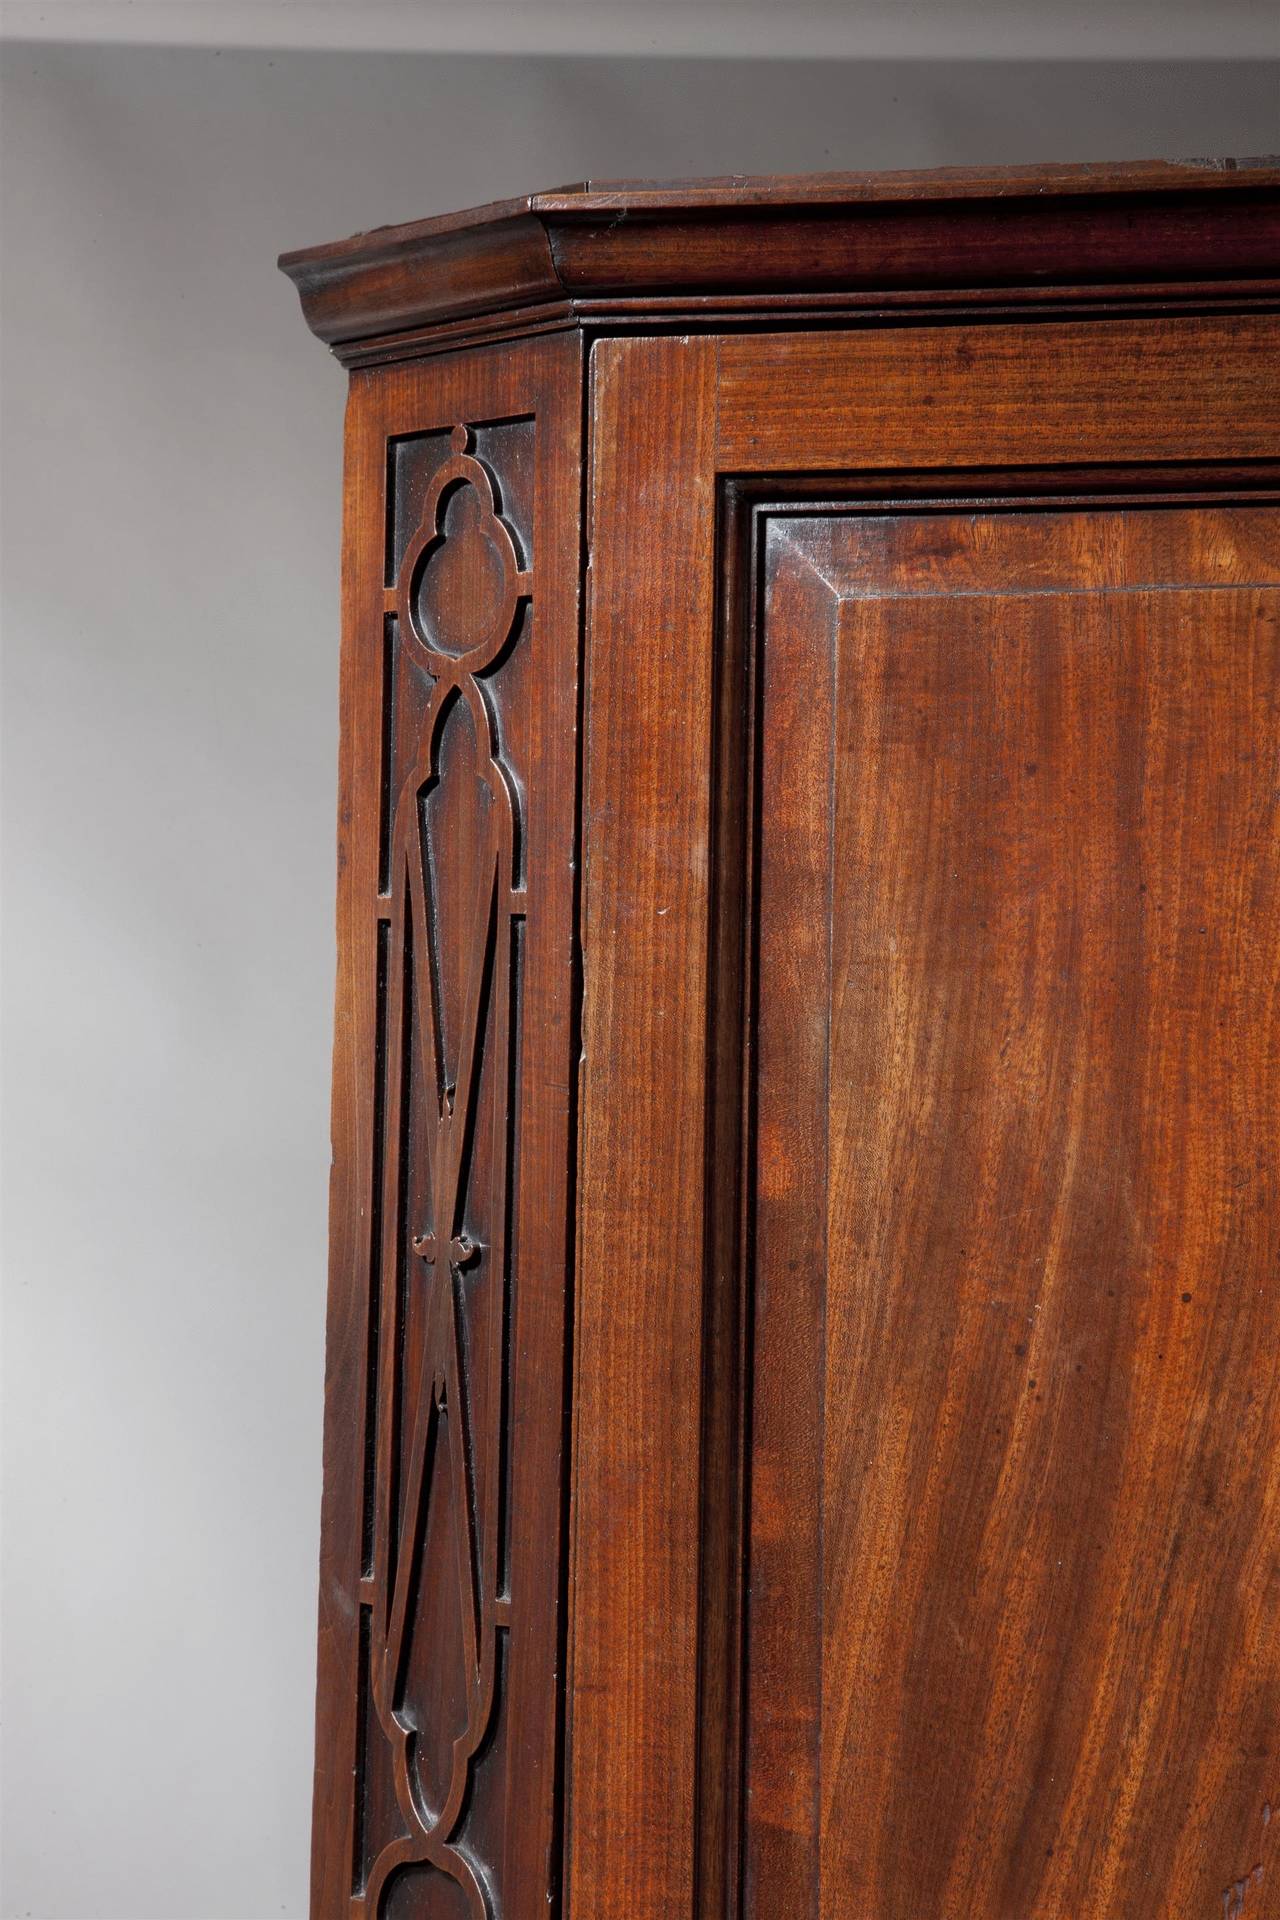 The paneled door flanked by canted edges with blind fret work 
carving (formerly with gallery).